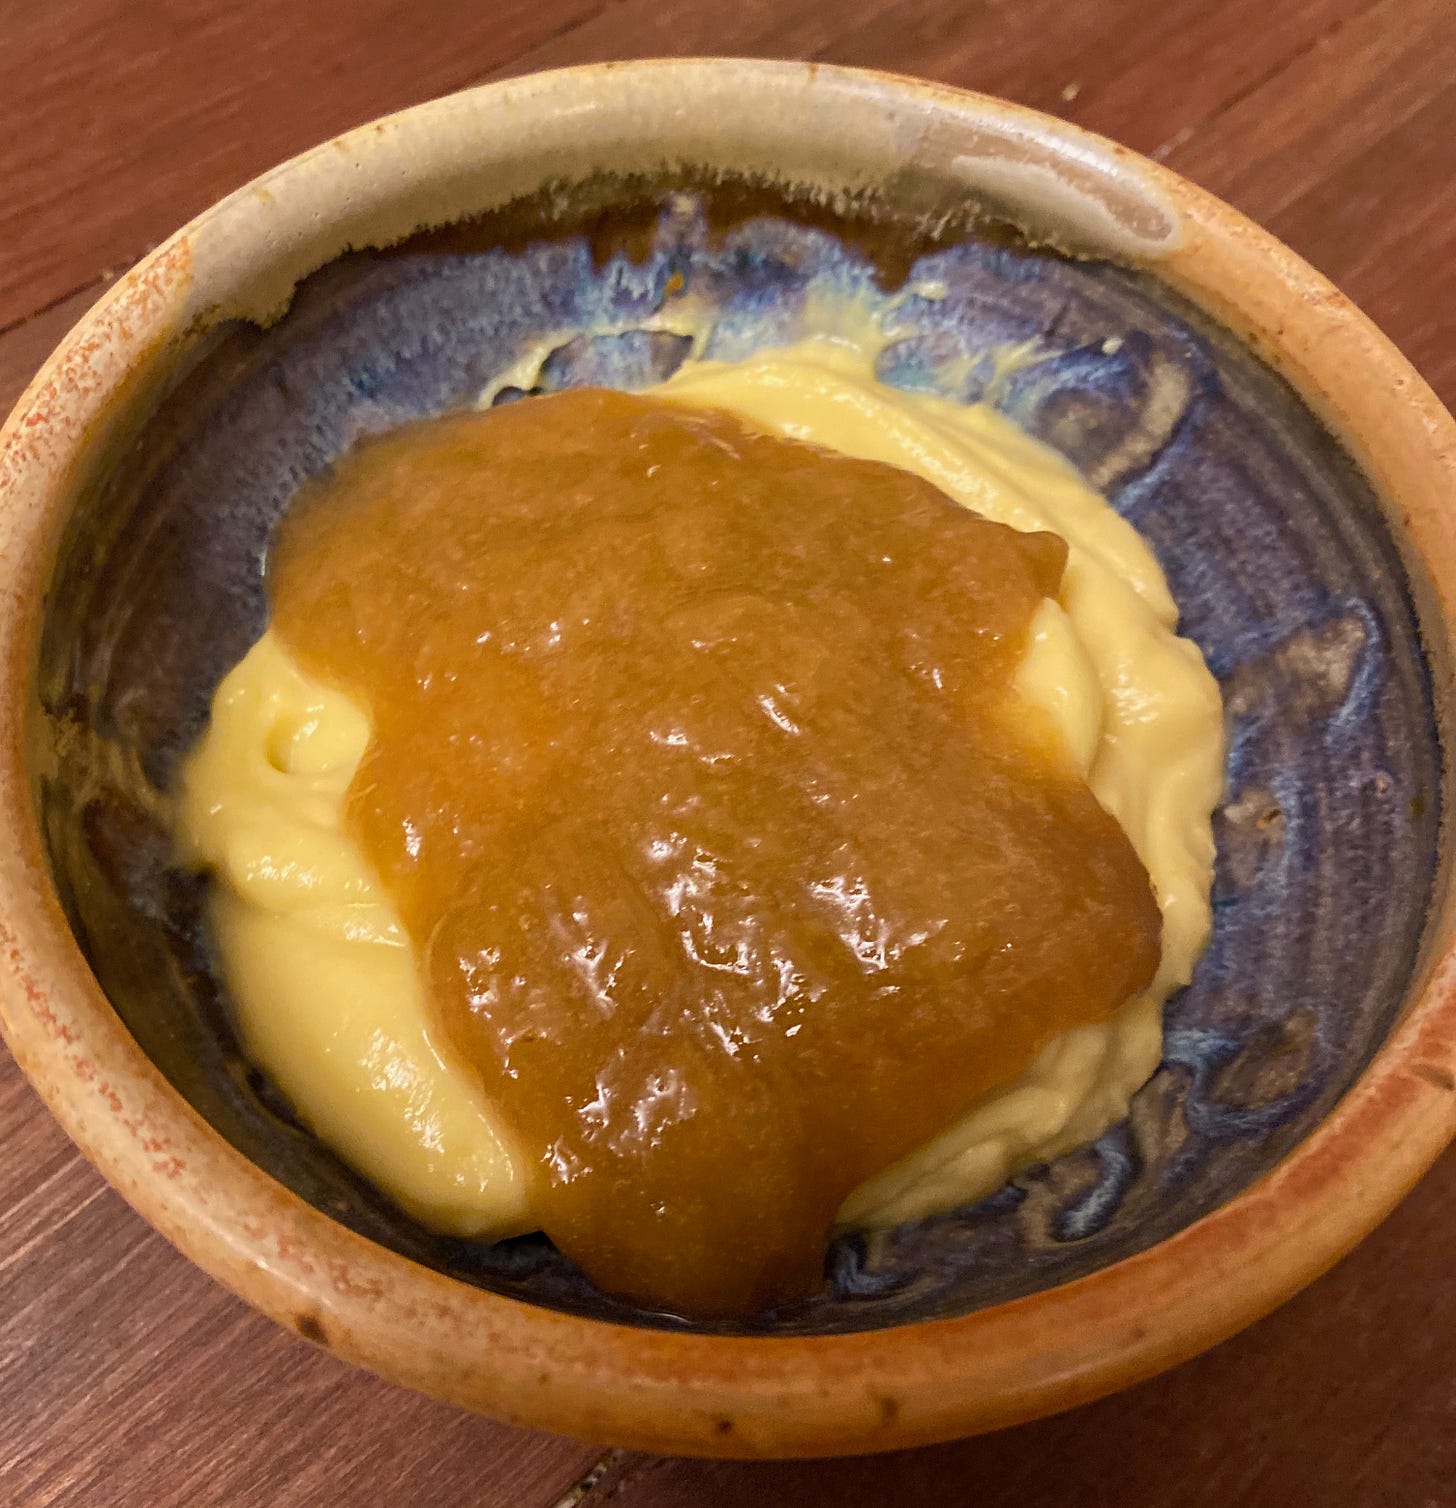 A small ceramic bowl of vanilla custard topped with rhubarb compote.